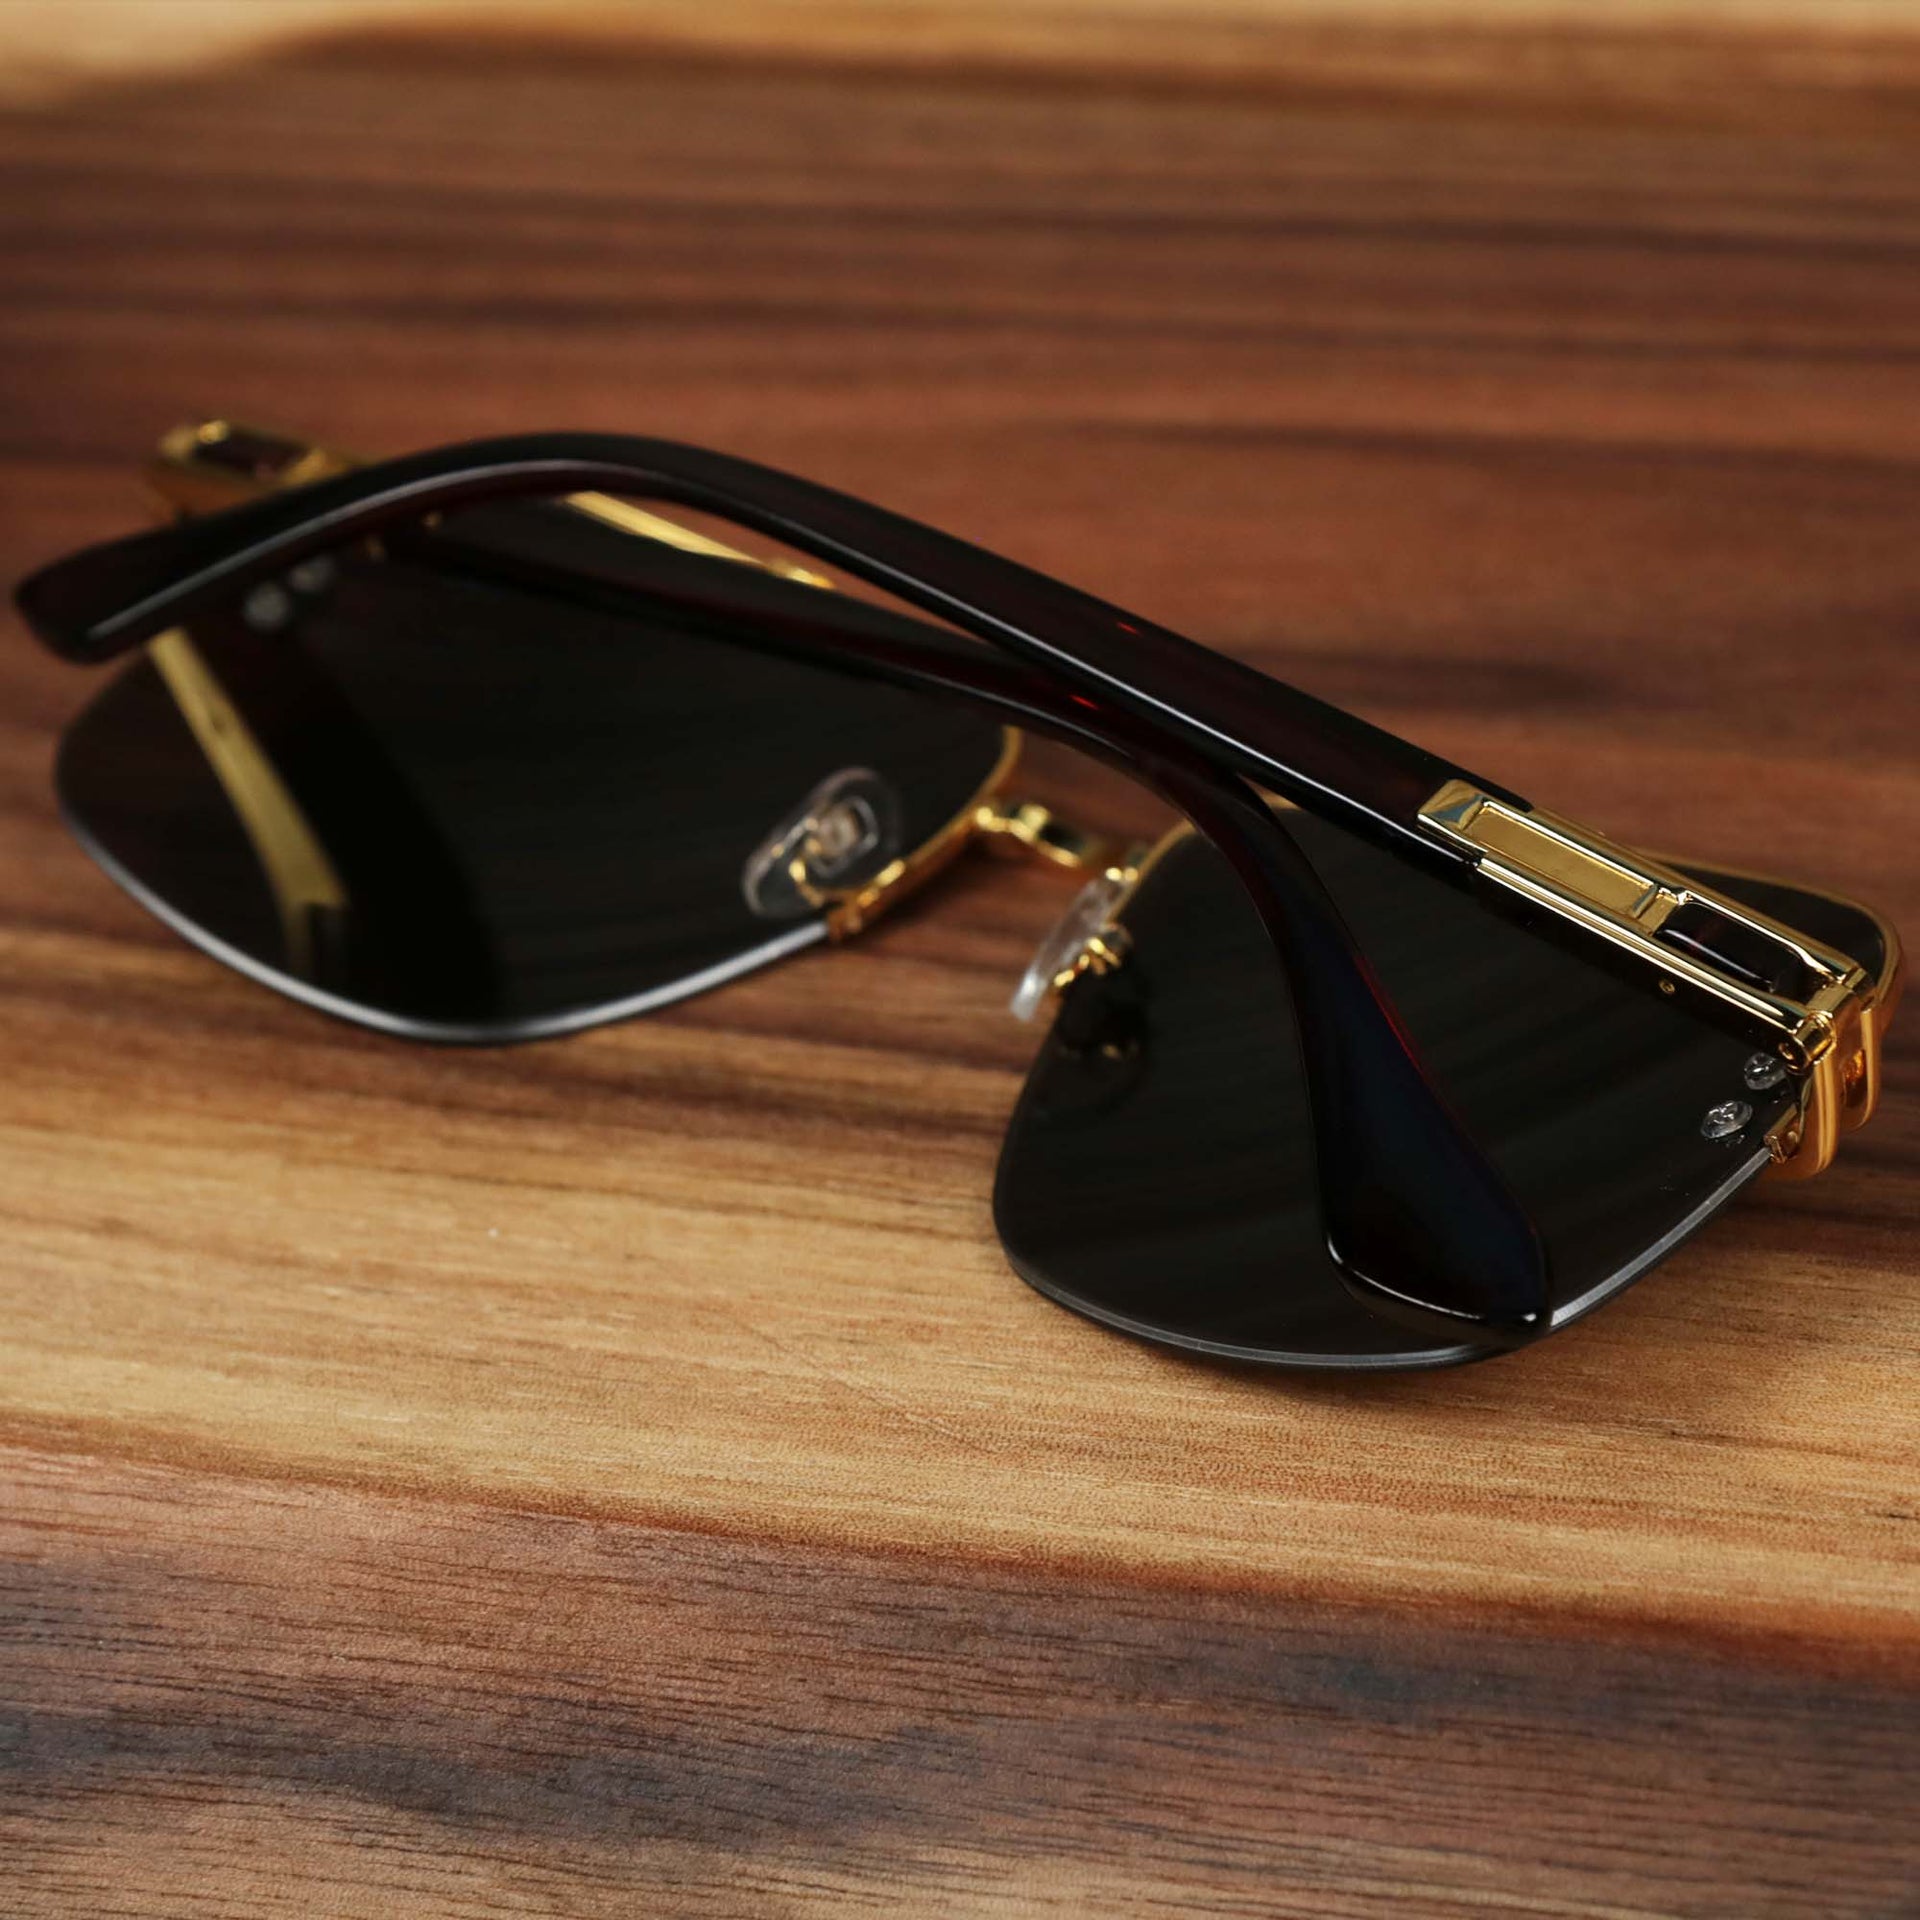 The Round Rectangle Frame Brown Lens Sunglasses with Gold Frame folded up